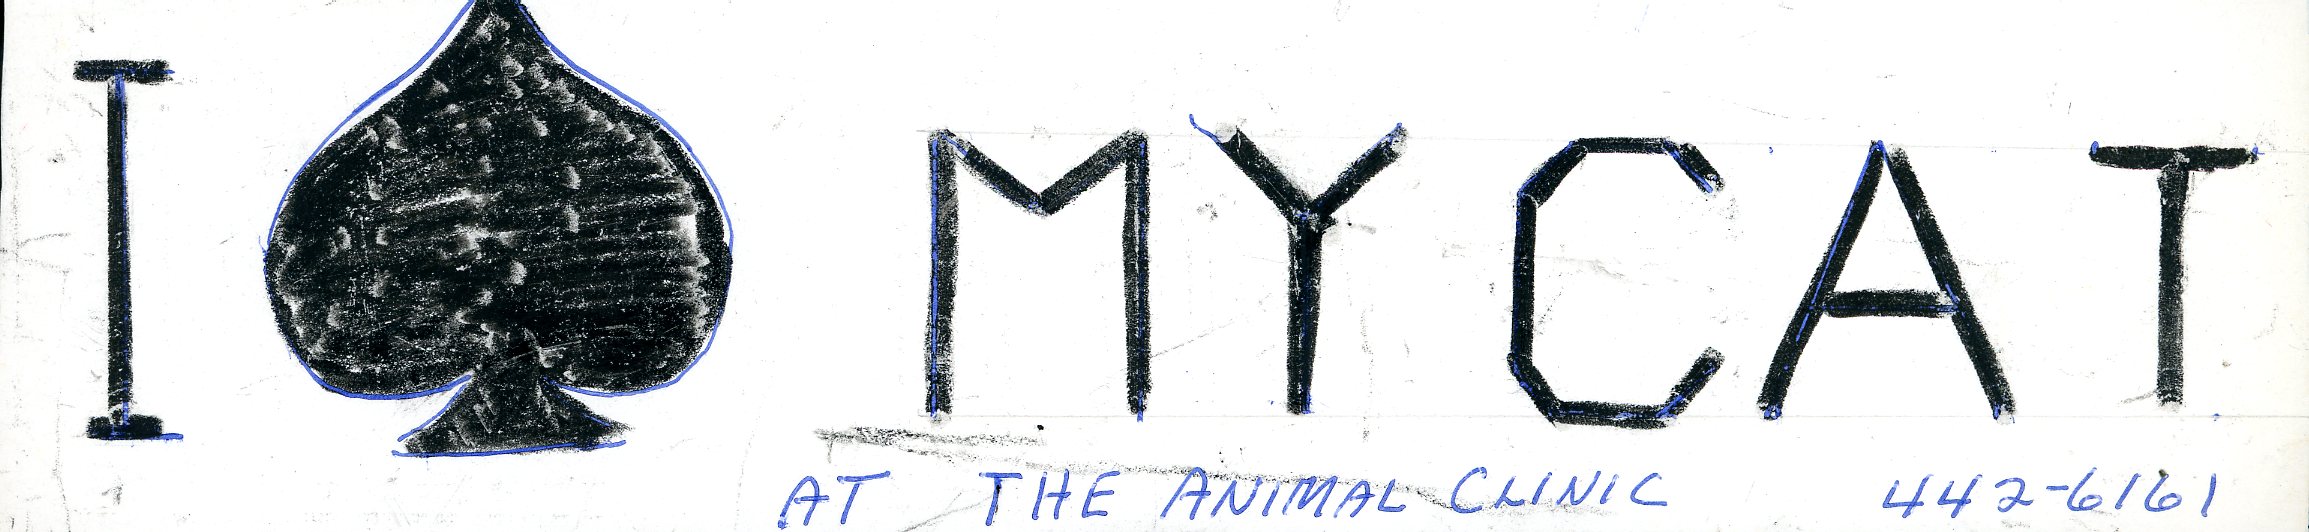 Lieberman’s prototype for “I (Spayed) My Cat” bumper sticker to advertise clinic services.